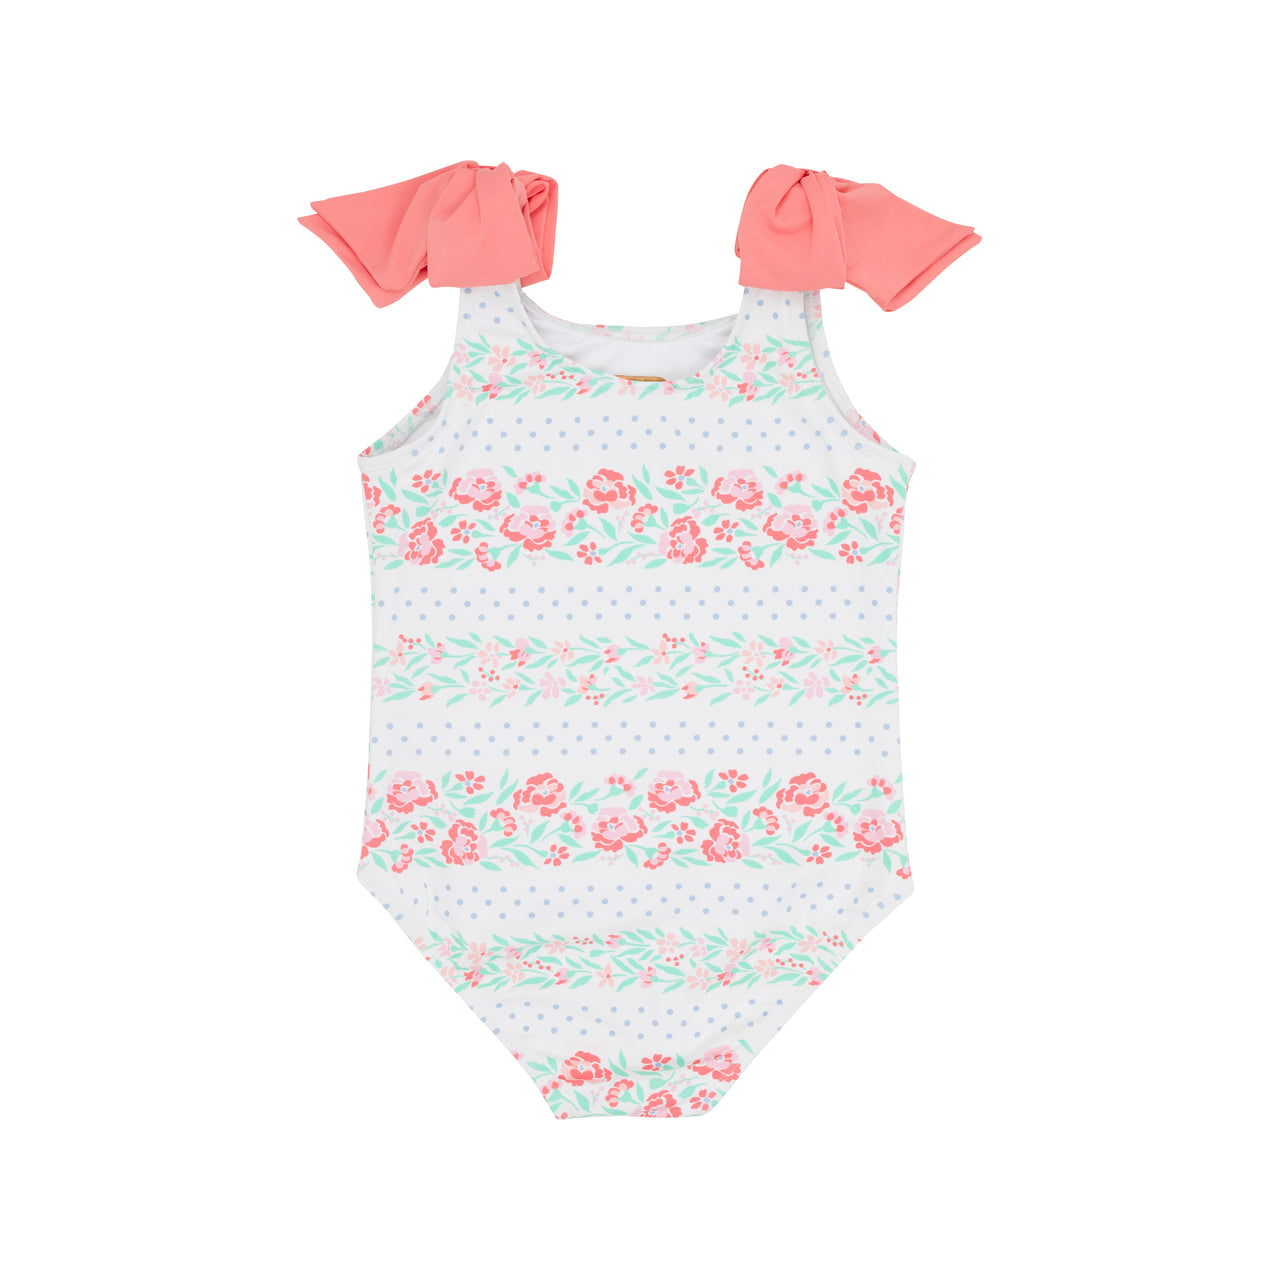 Edisto Beach Bathing Suit | Gasparilla Garlands With Parrot Cay Coral Bows